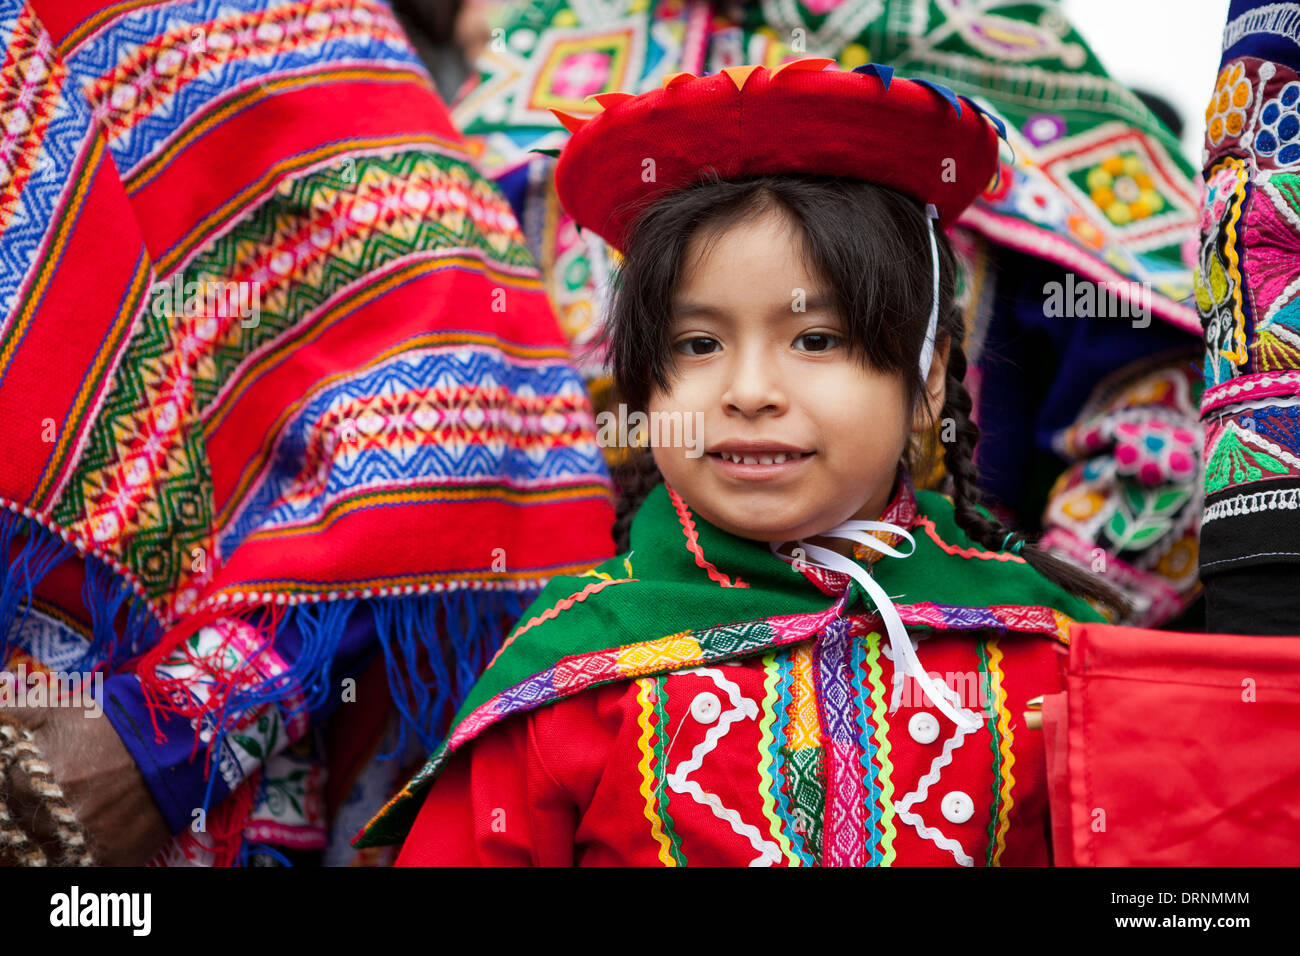 A young girl at the Chinese New Year celebration in London Stock Photo